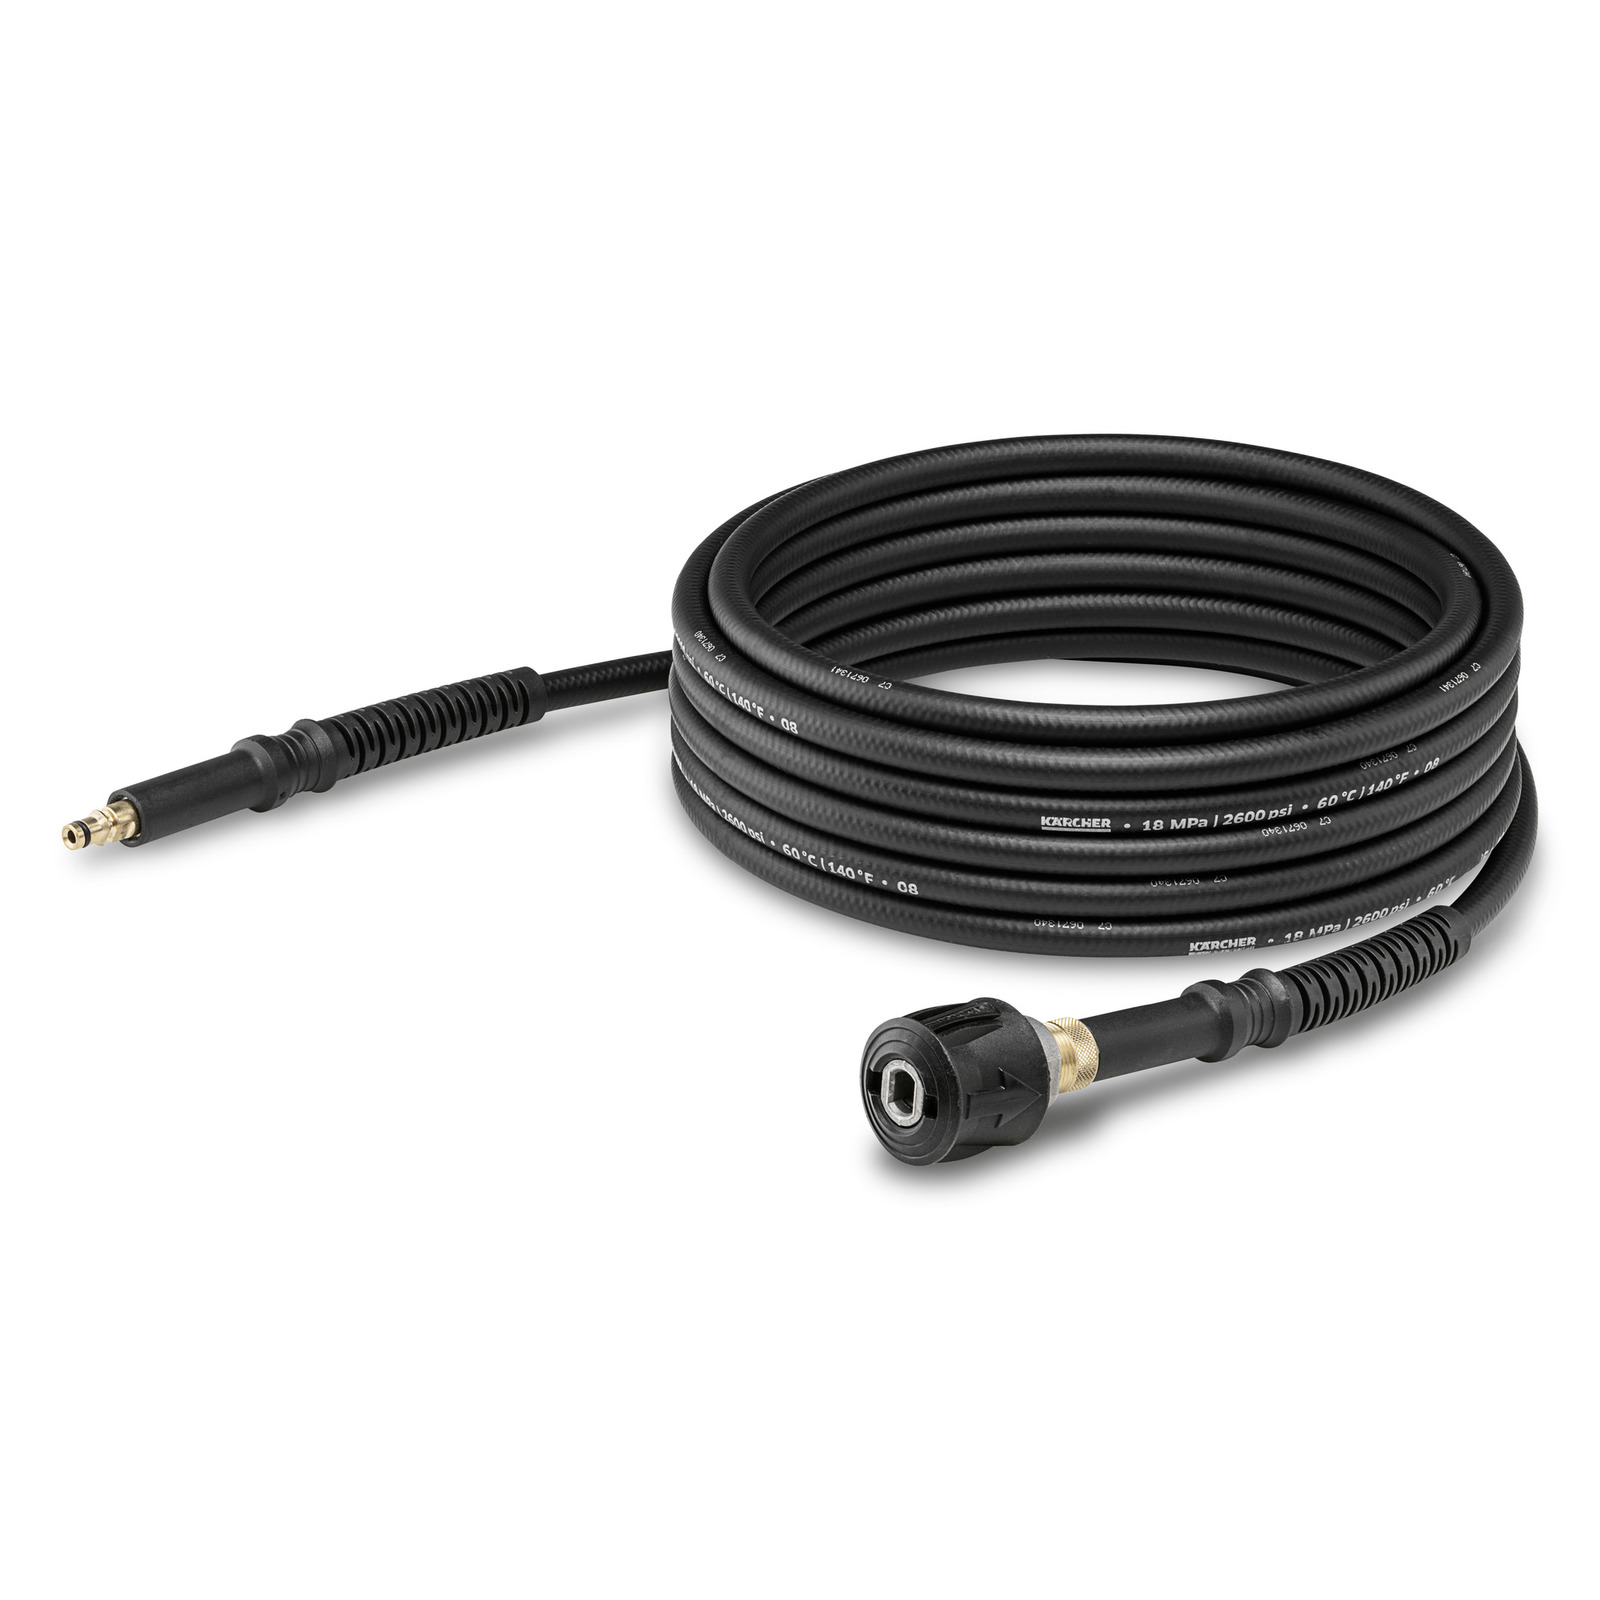 Karcher K2 Pressure Washer Hose compare with your hose 